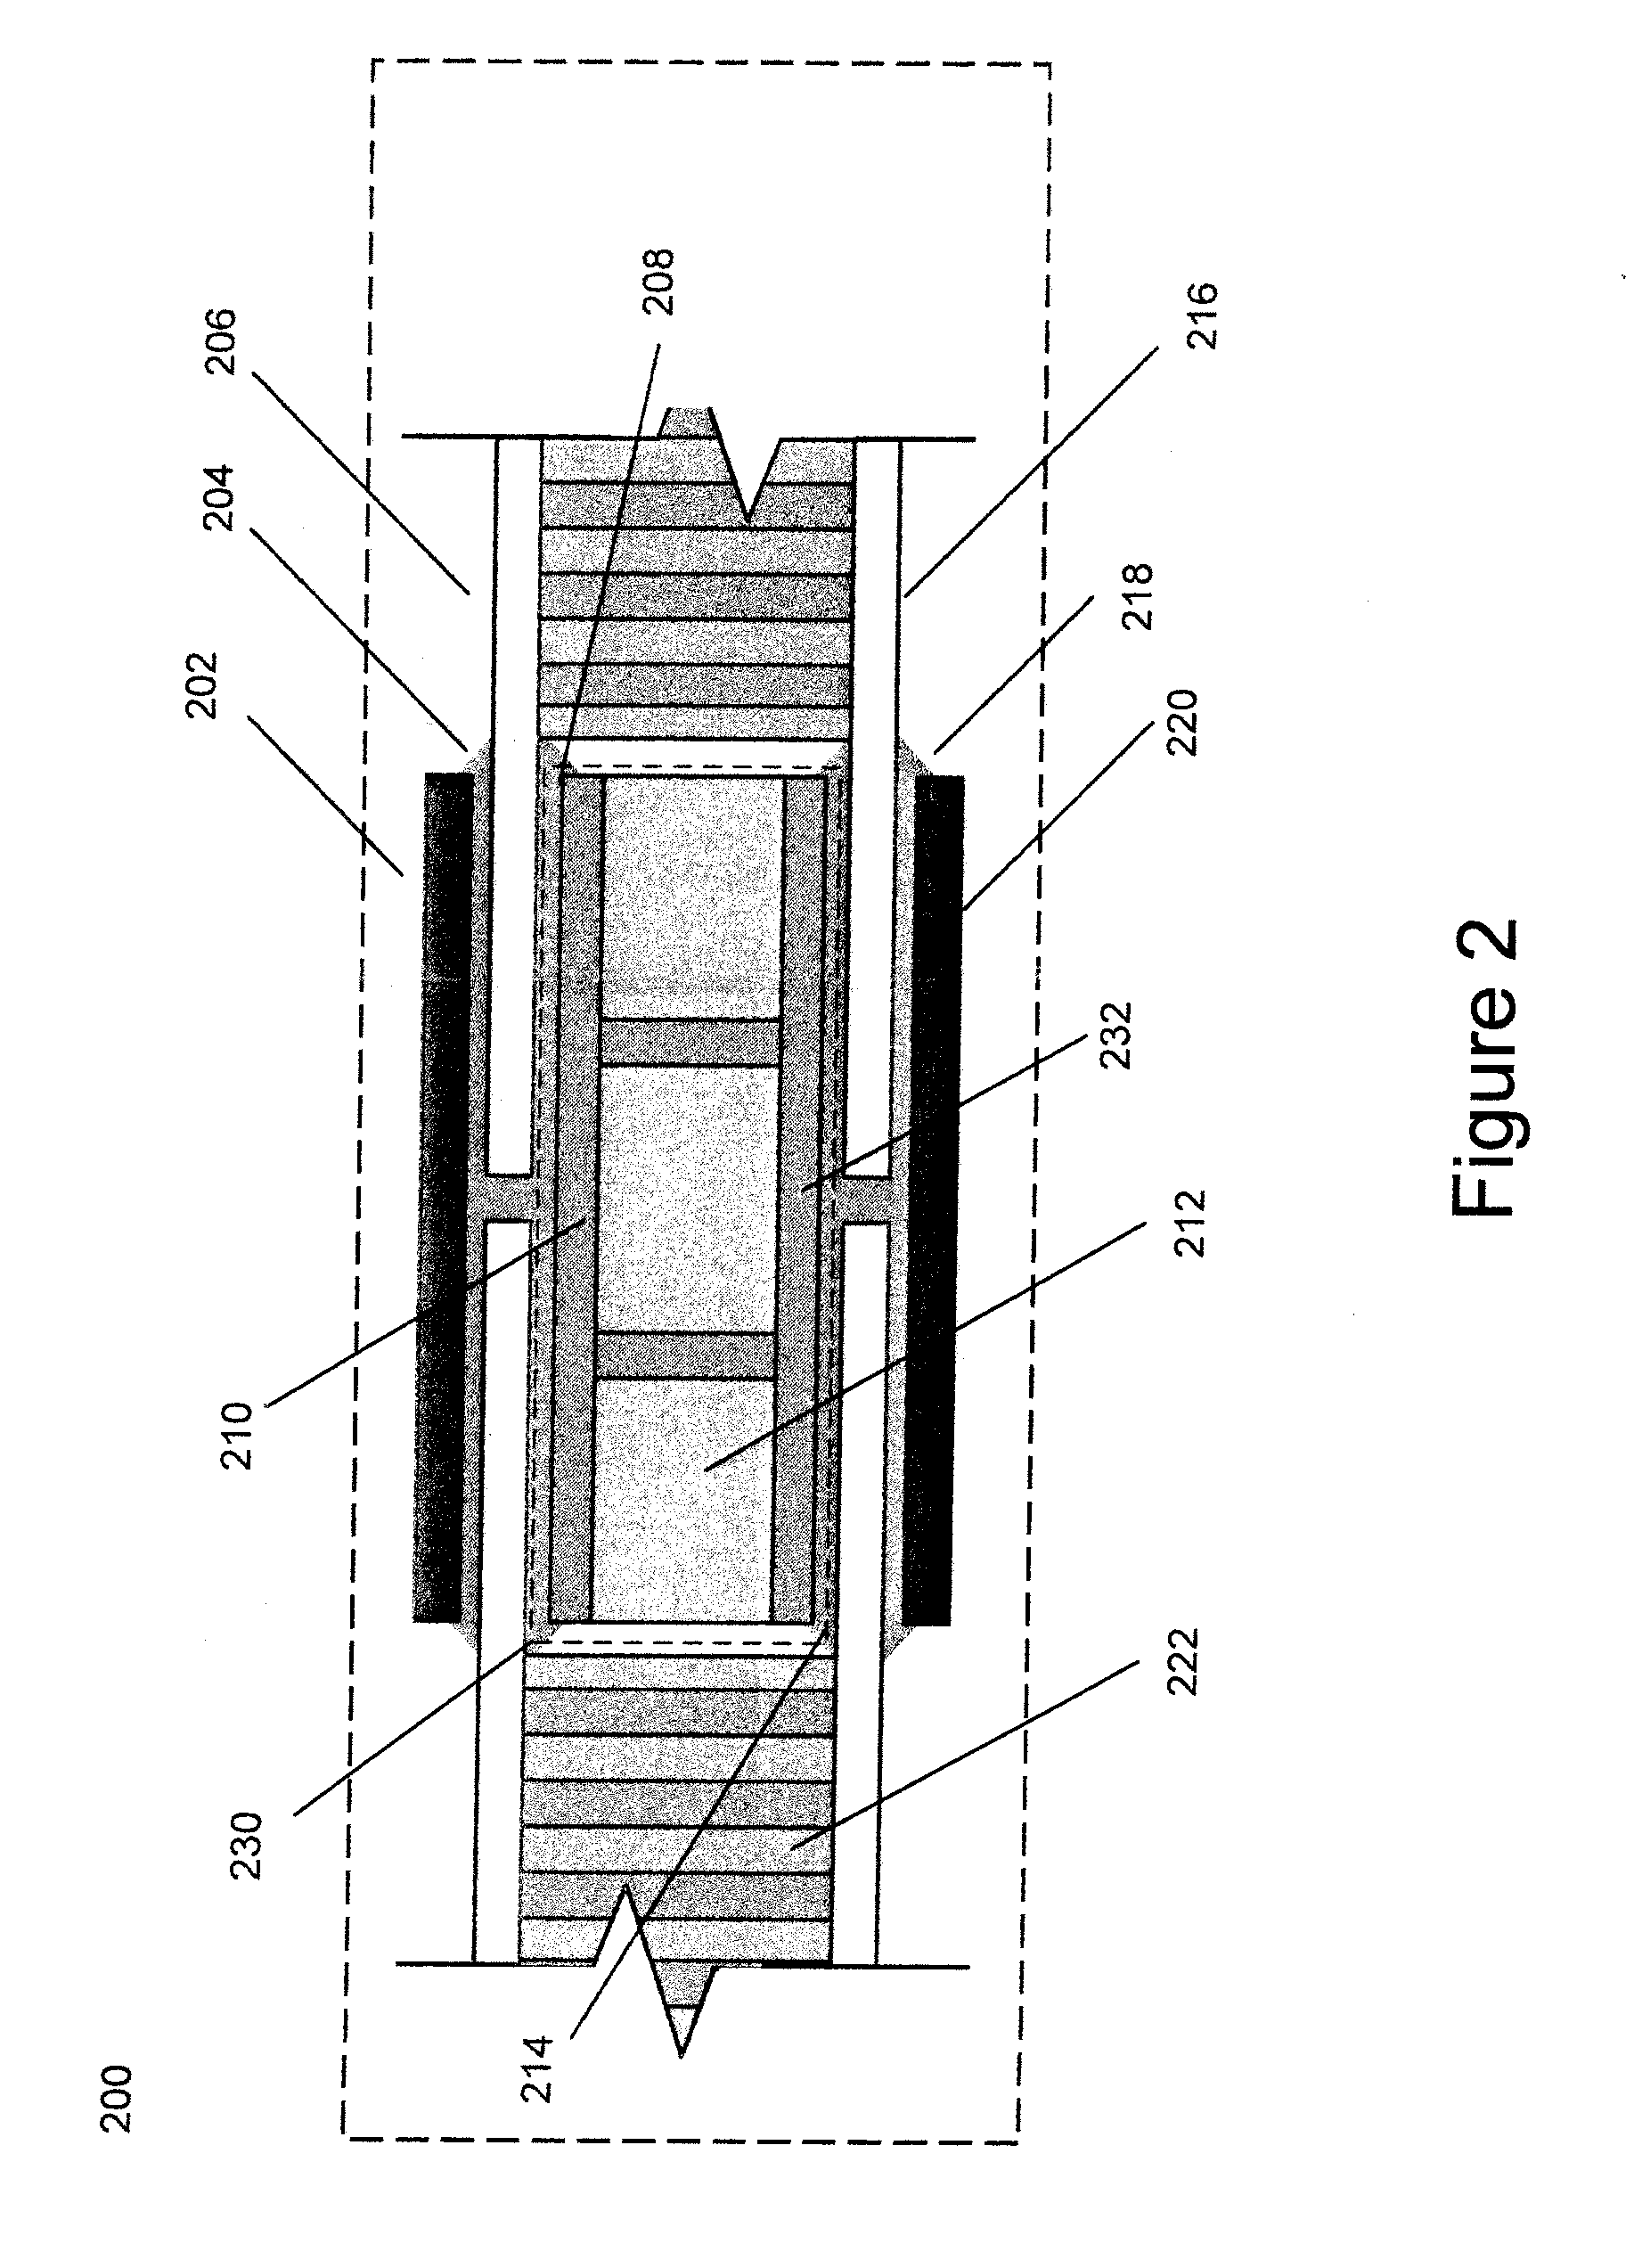 Systems, Apparatuses, and Methods for Using Durable Adhesively Bonded Joints for Sandwich Structures